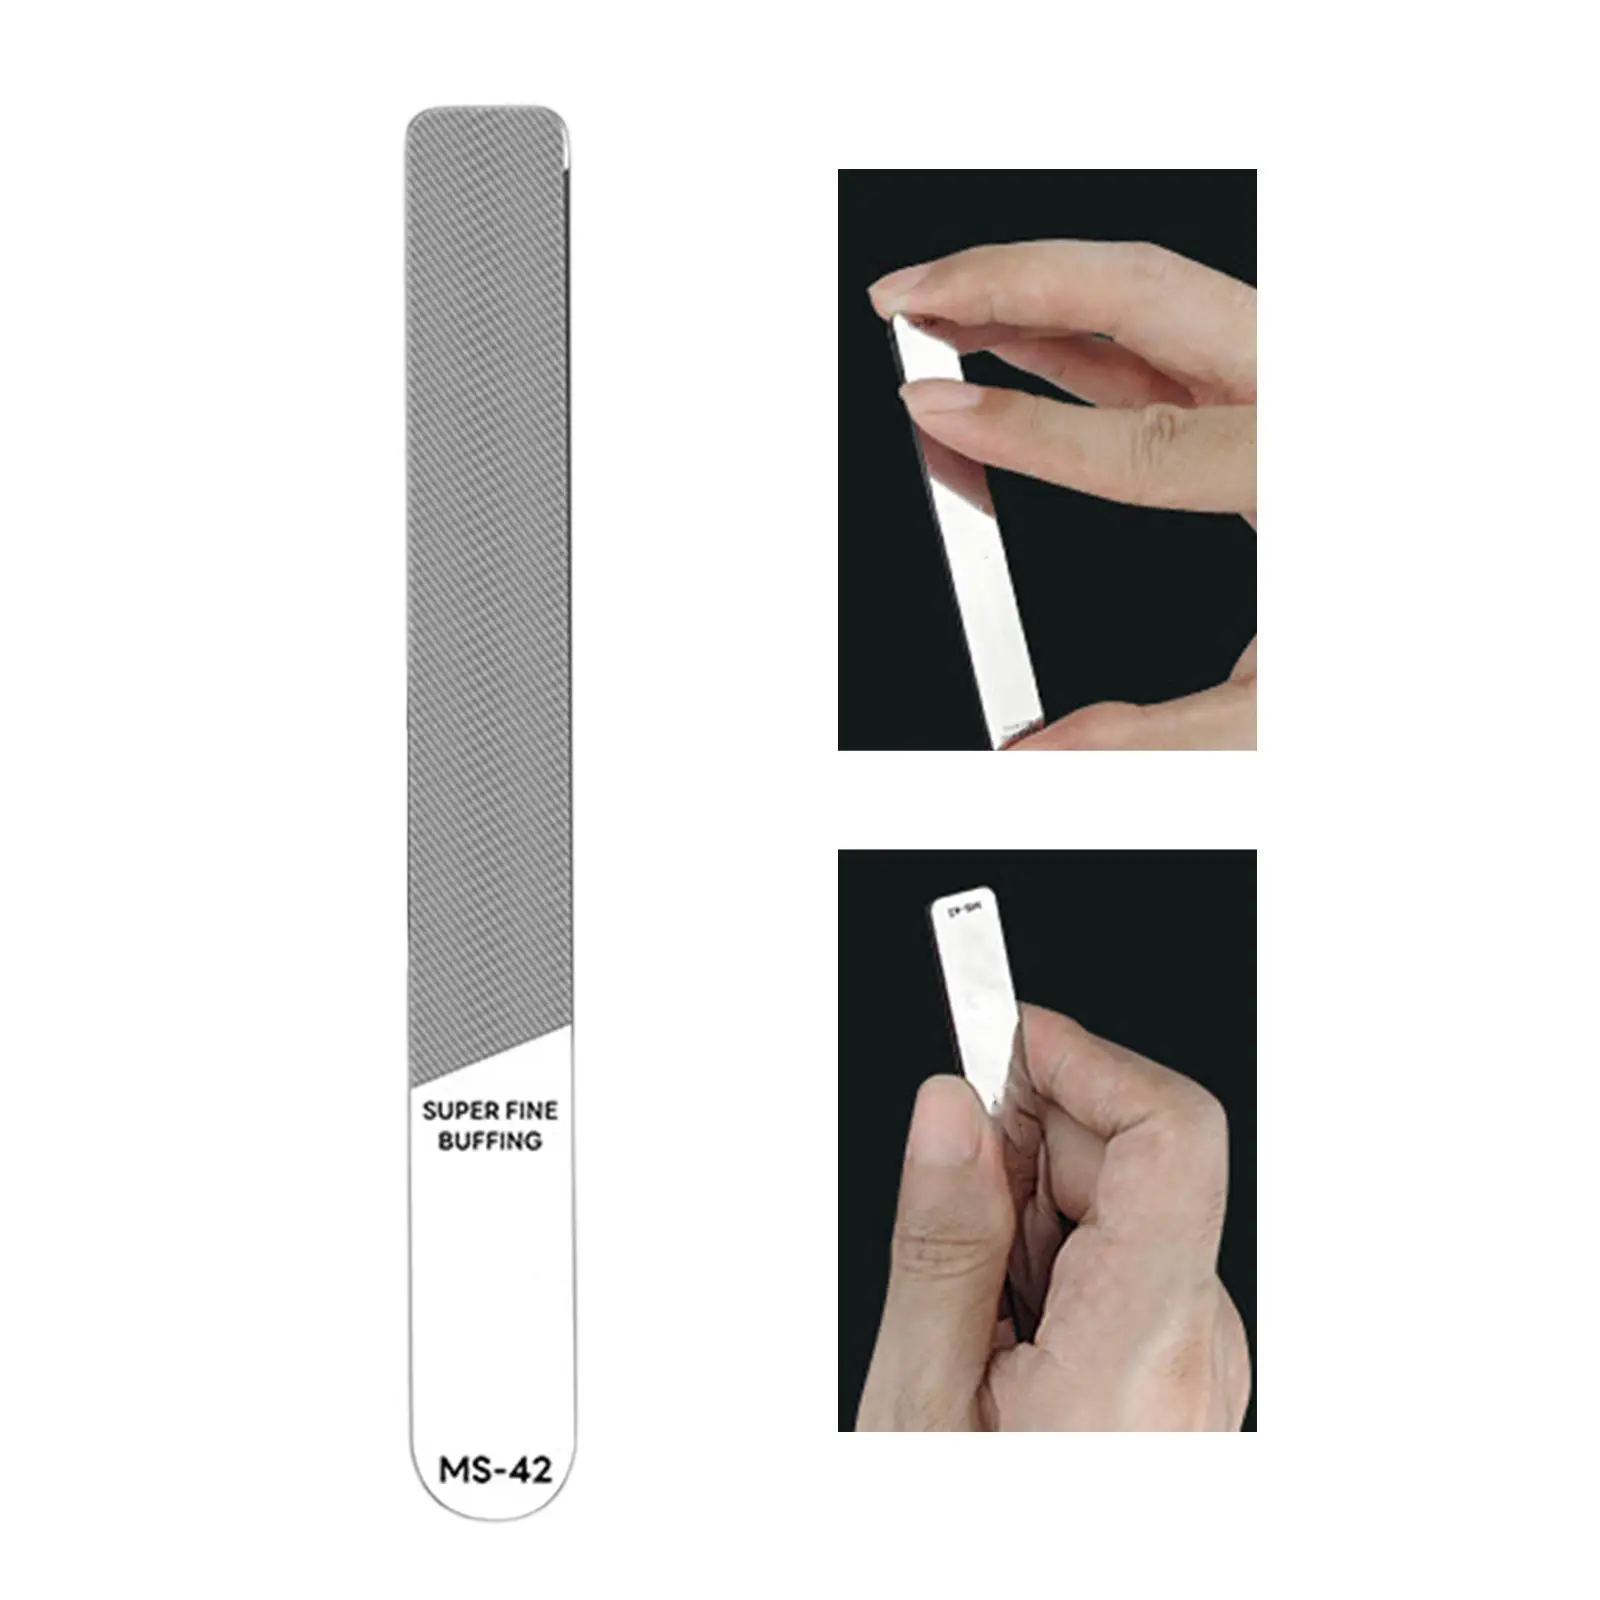 Glass File for Models Rustproof Precision Hand Tools Hobby Grinding Tool for Model Miniature Resin Material Figure Work